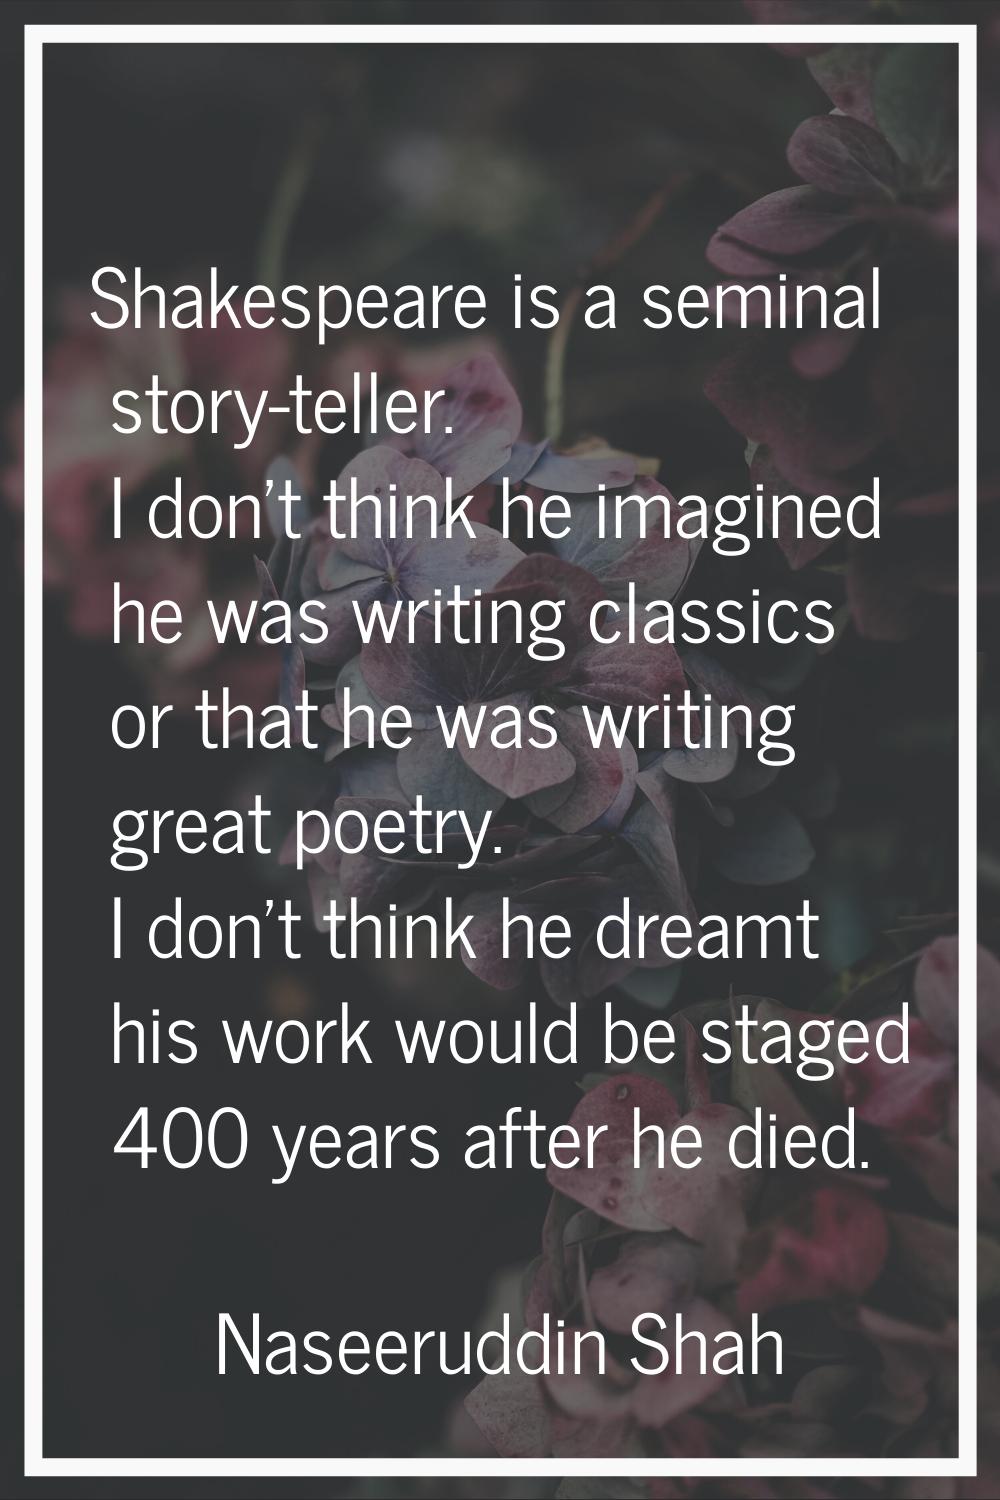 Shakespeare is a seminal story-teller. I don't think he imagined he was writing classics or that he